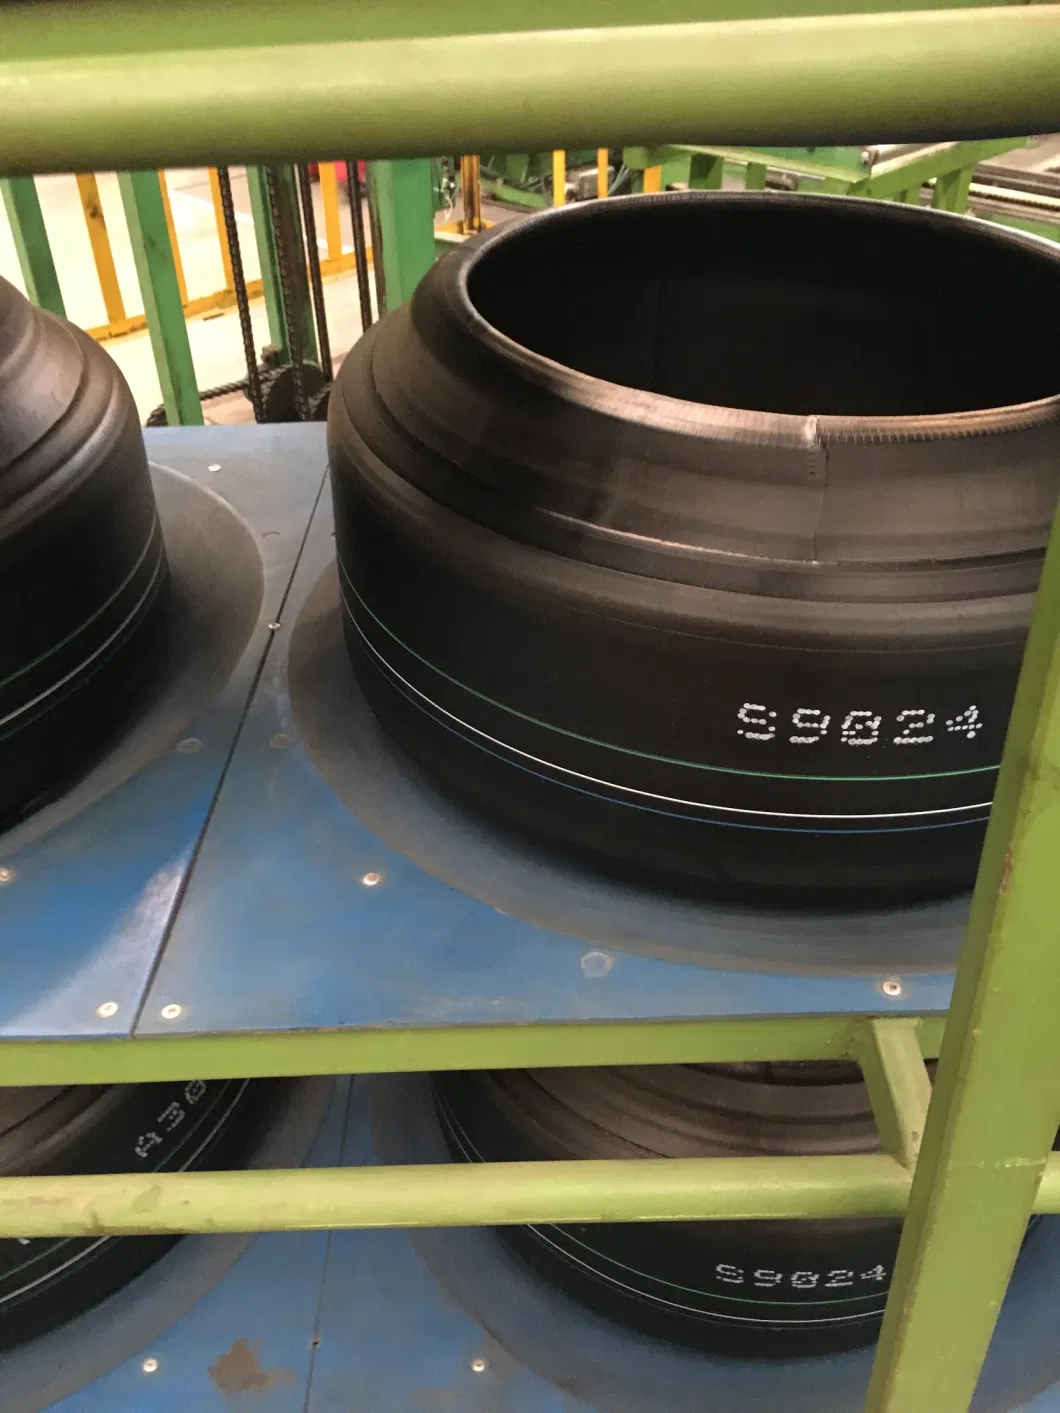 PCR Passenger Car Tyres. China Tyre Factory Price, Run-Flat Tires, Tyres for SUV, 4*4, ATV, Mt, UHP, LTR. Top Brand Tyre 205/55r16, Wholesale New Tyre, M+S Tyre